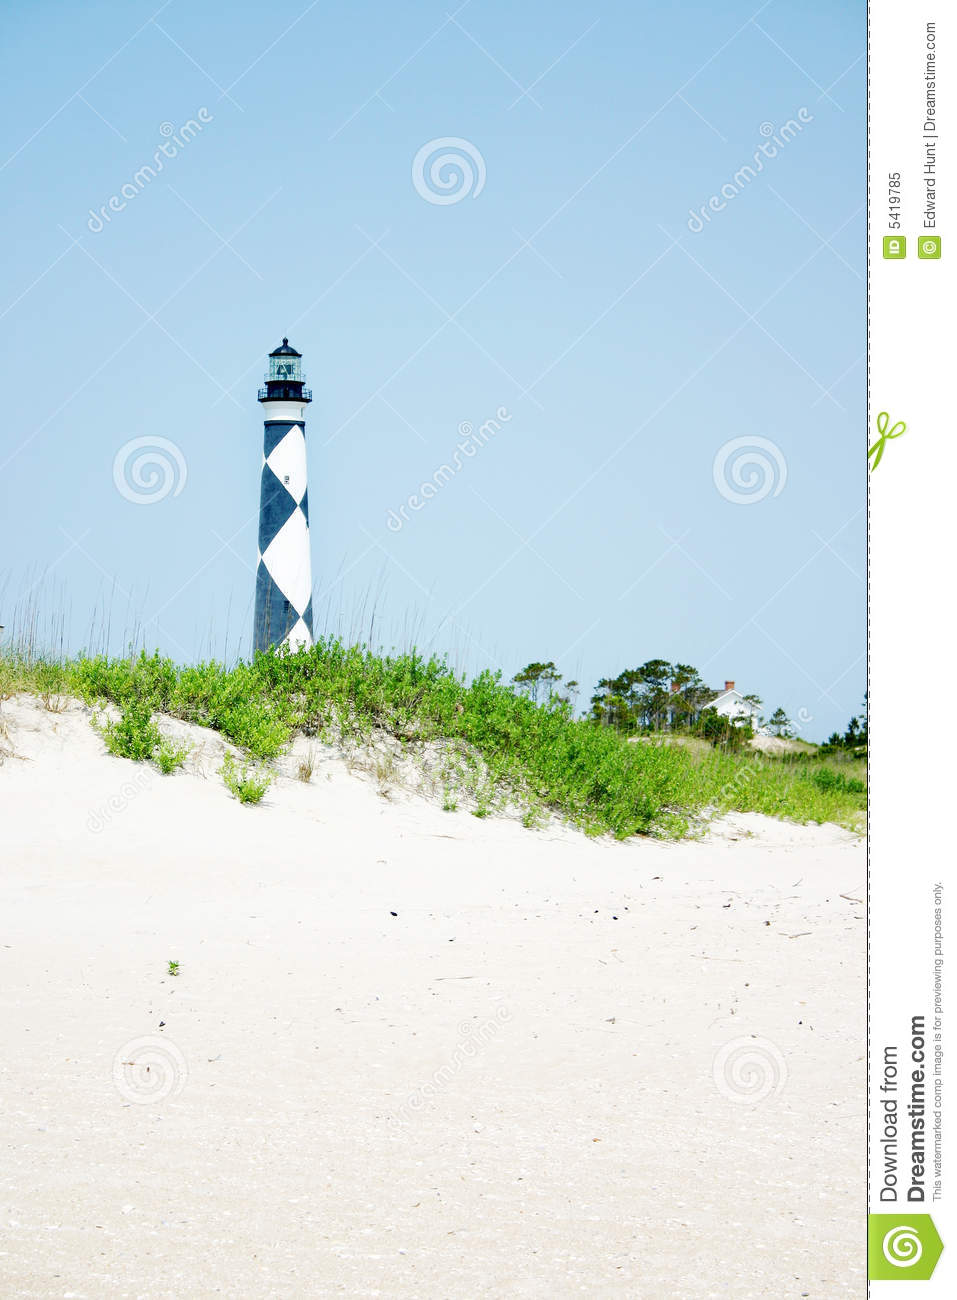 Cape Lookout Light House Royalty Free Stock Photo   Image  5419785